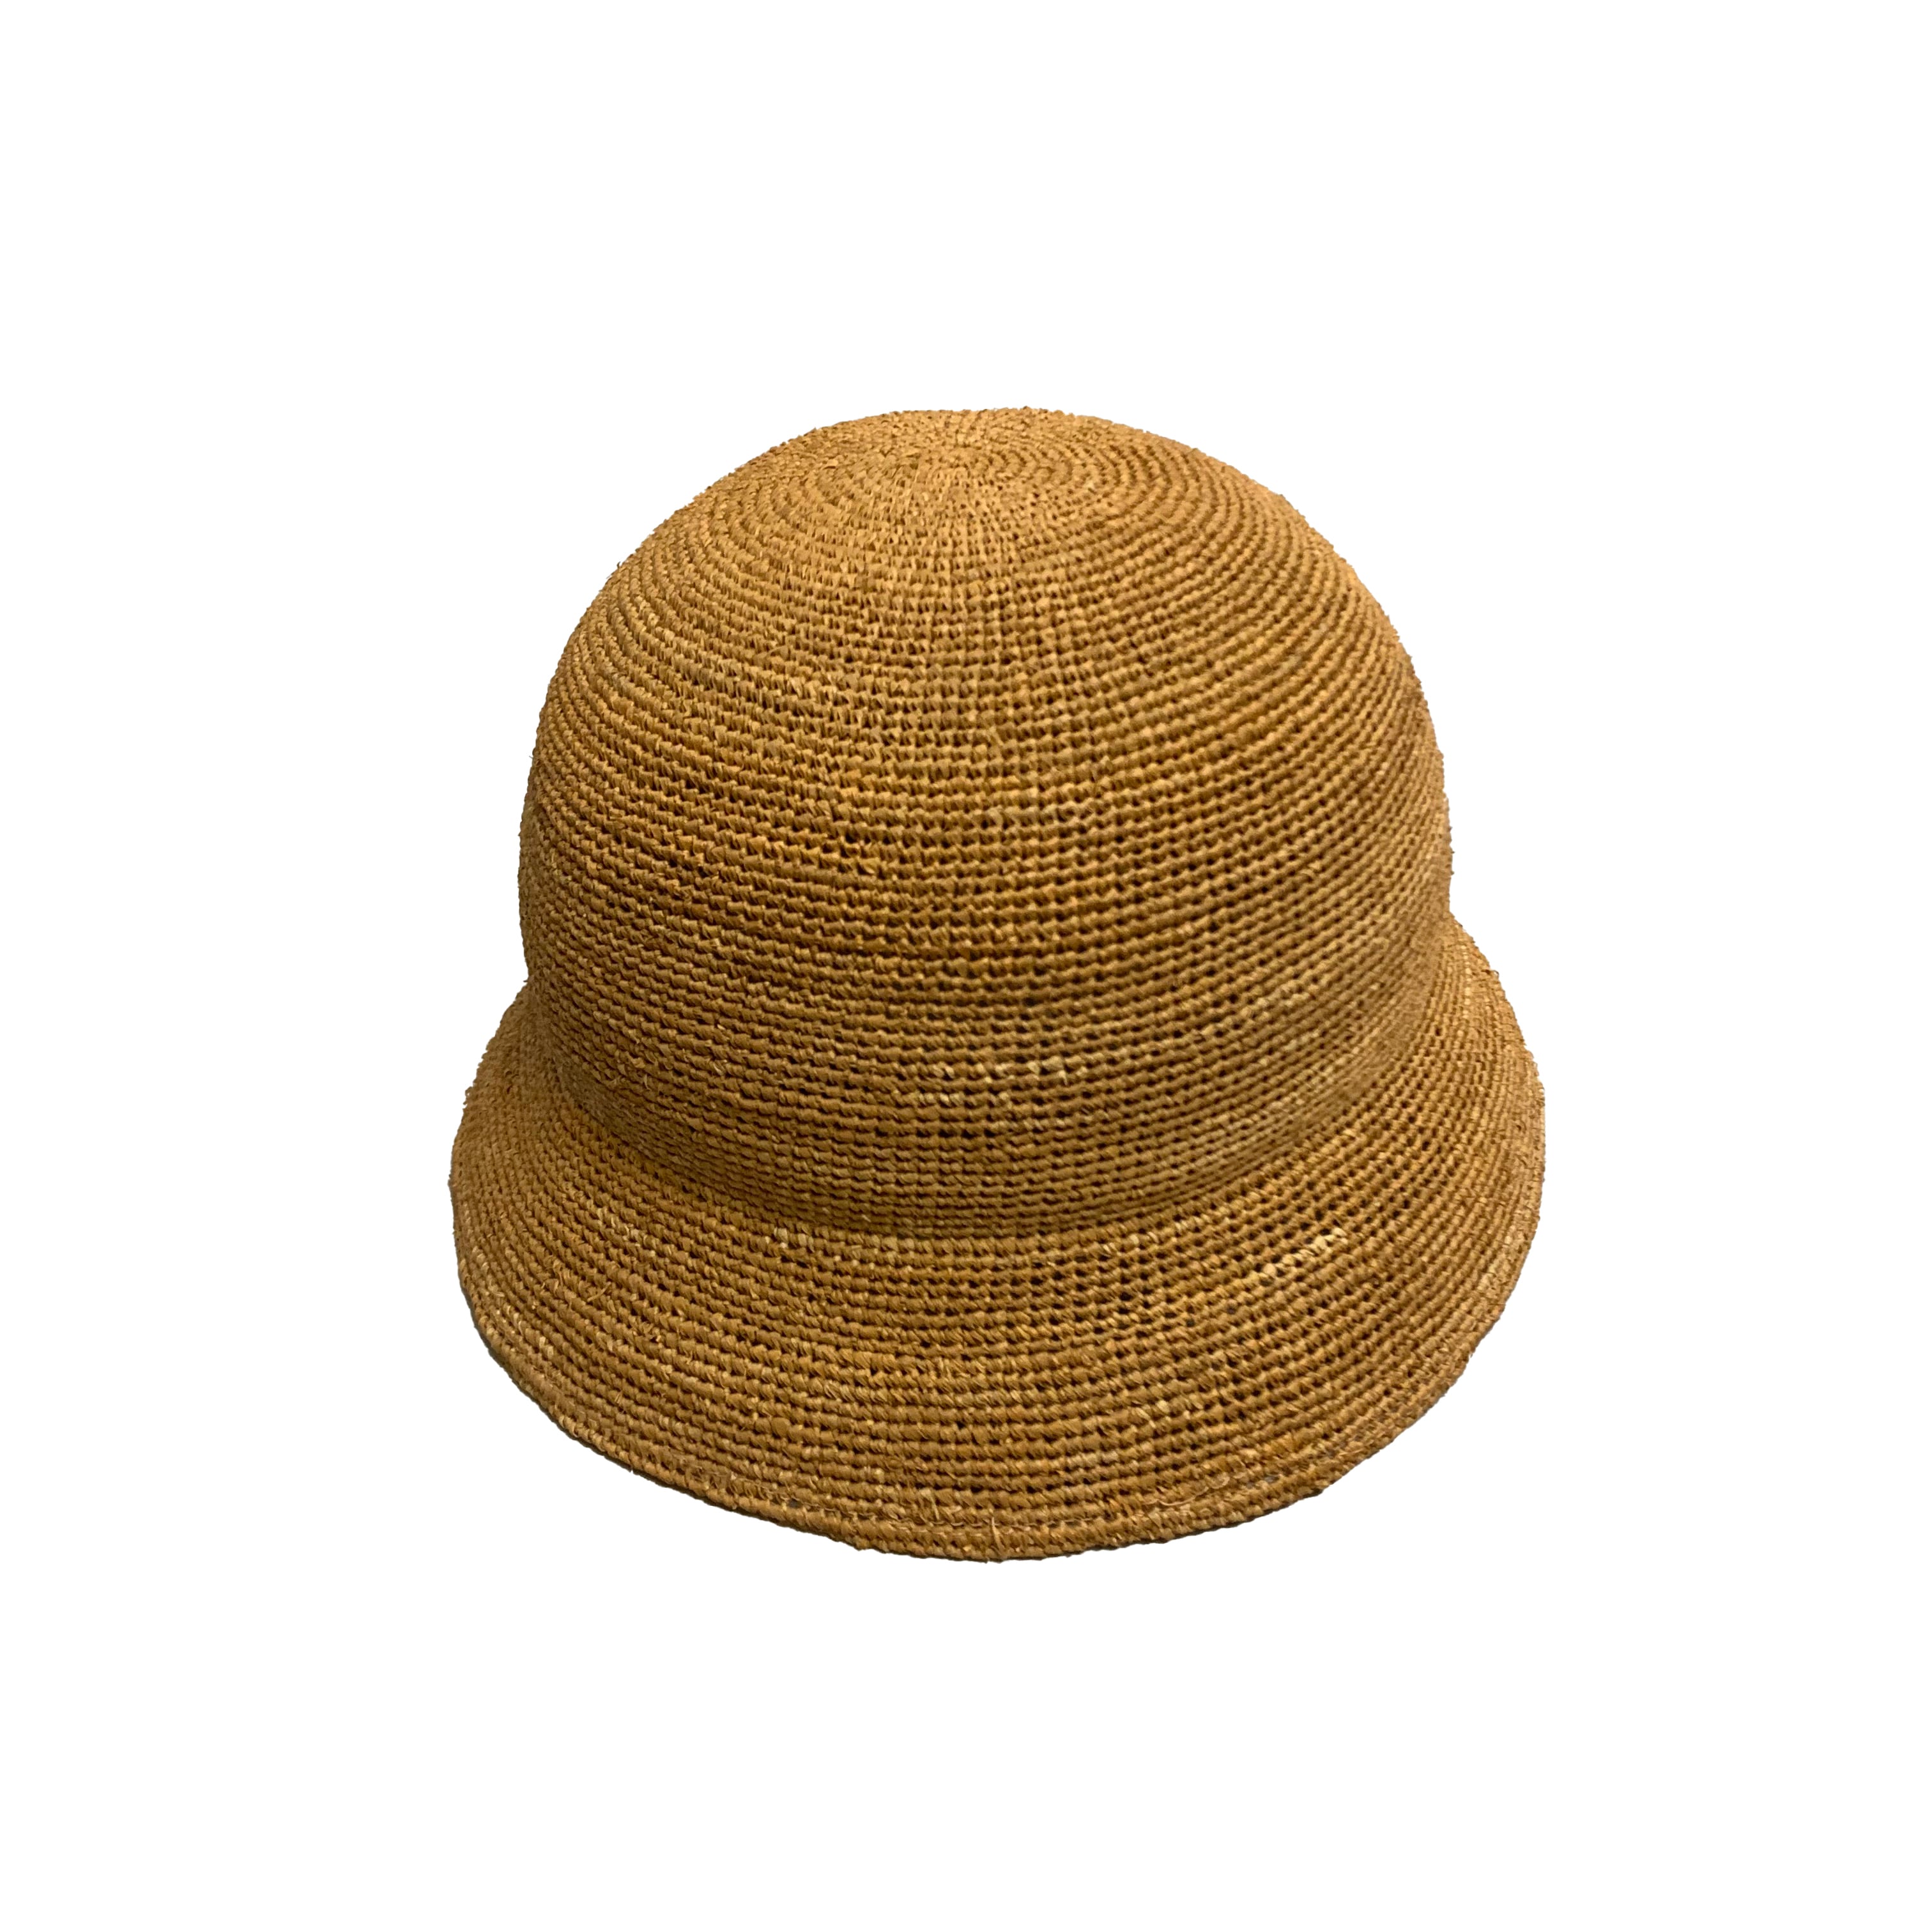 NOROLL / DETOURS RAFFIA HAT -BROWN- | THE NEWAGE CLUB powered by BASE